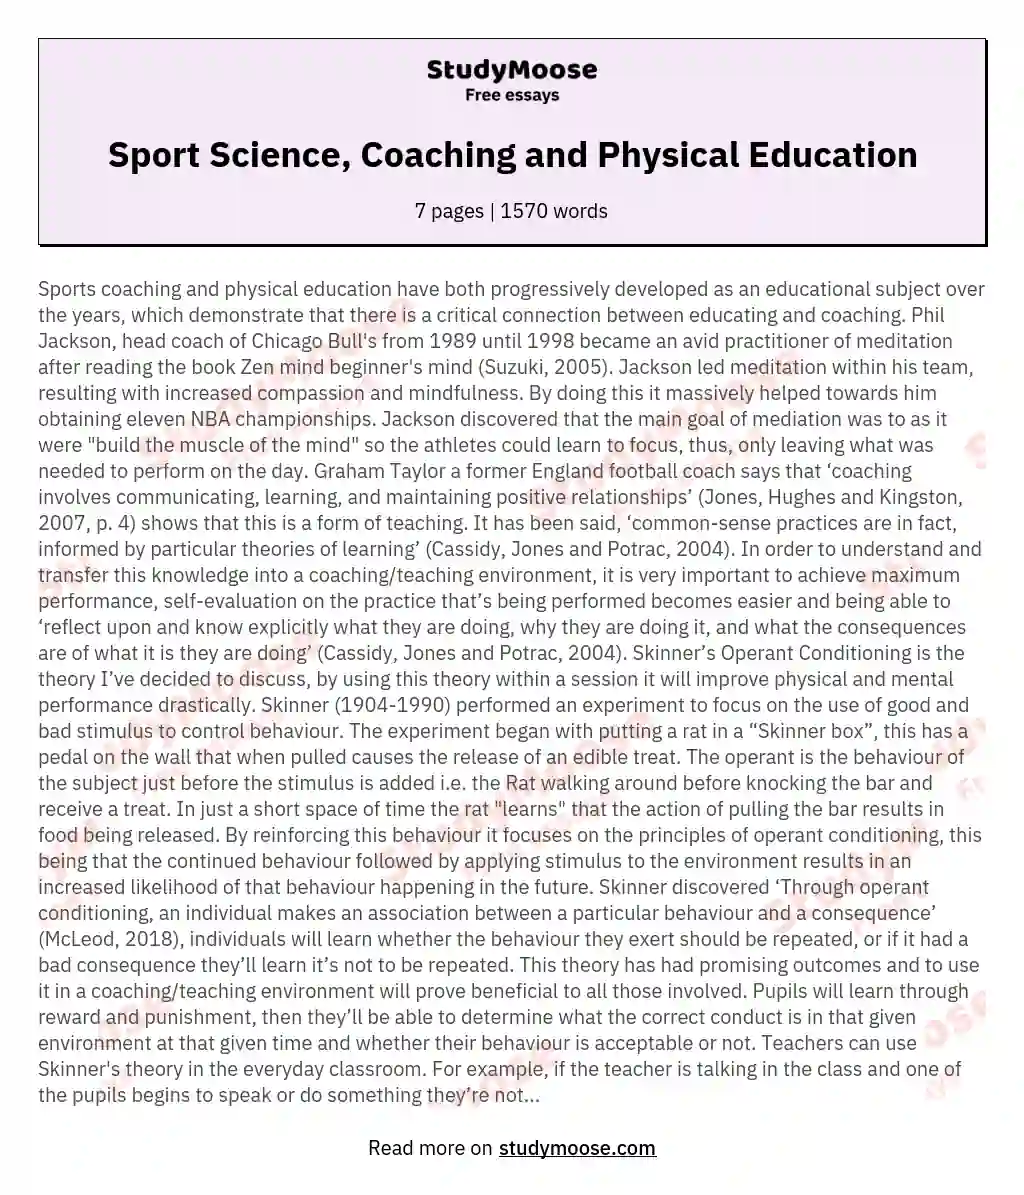 Sport Science, Coaching and Physical Education essay